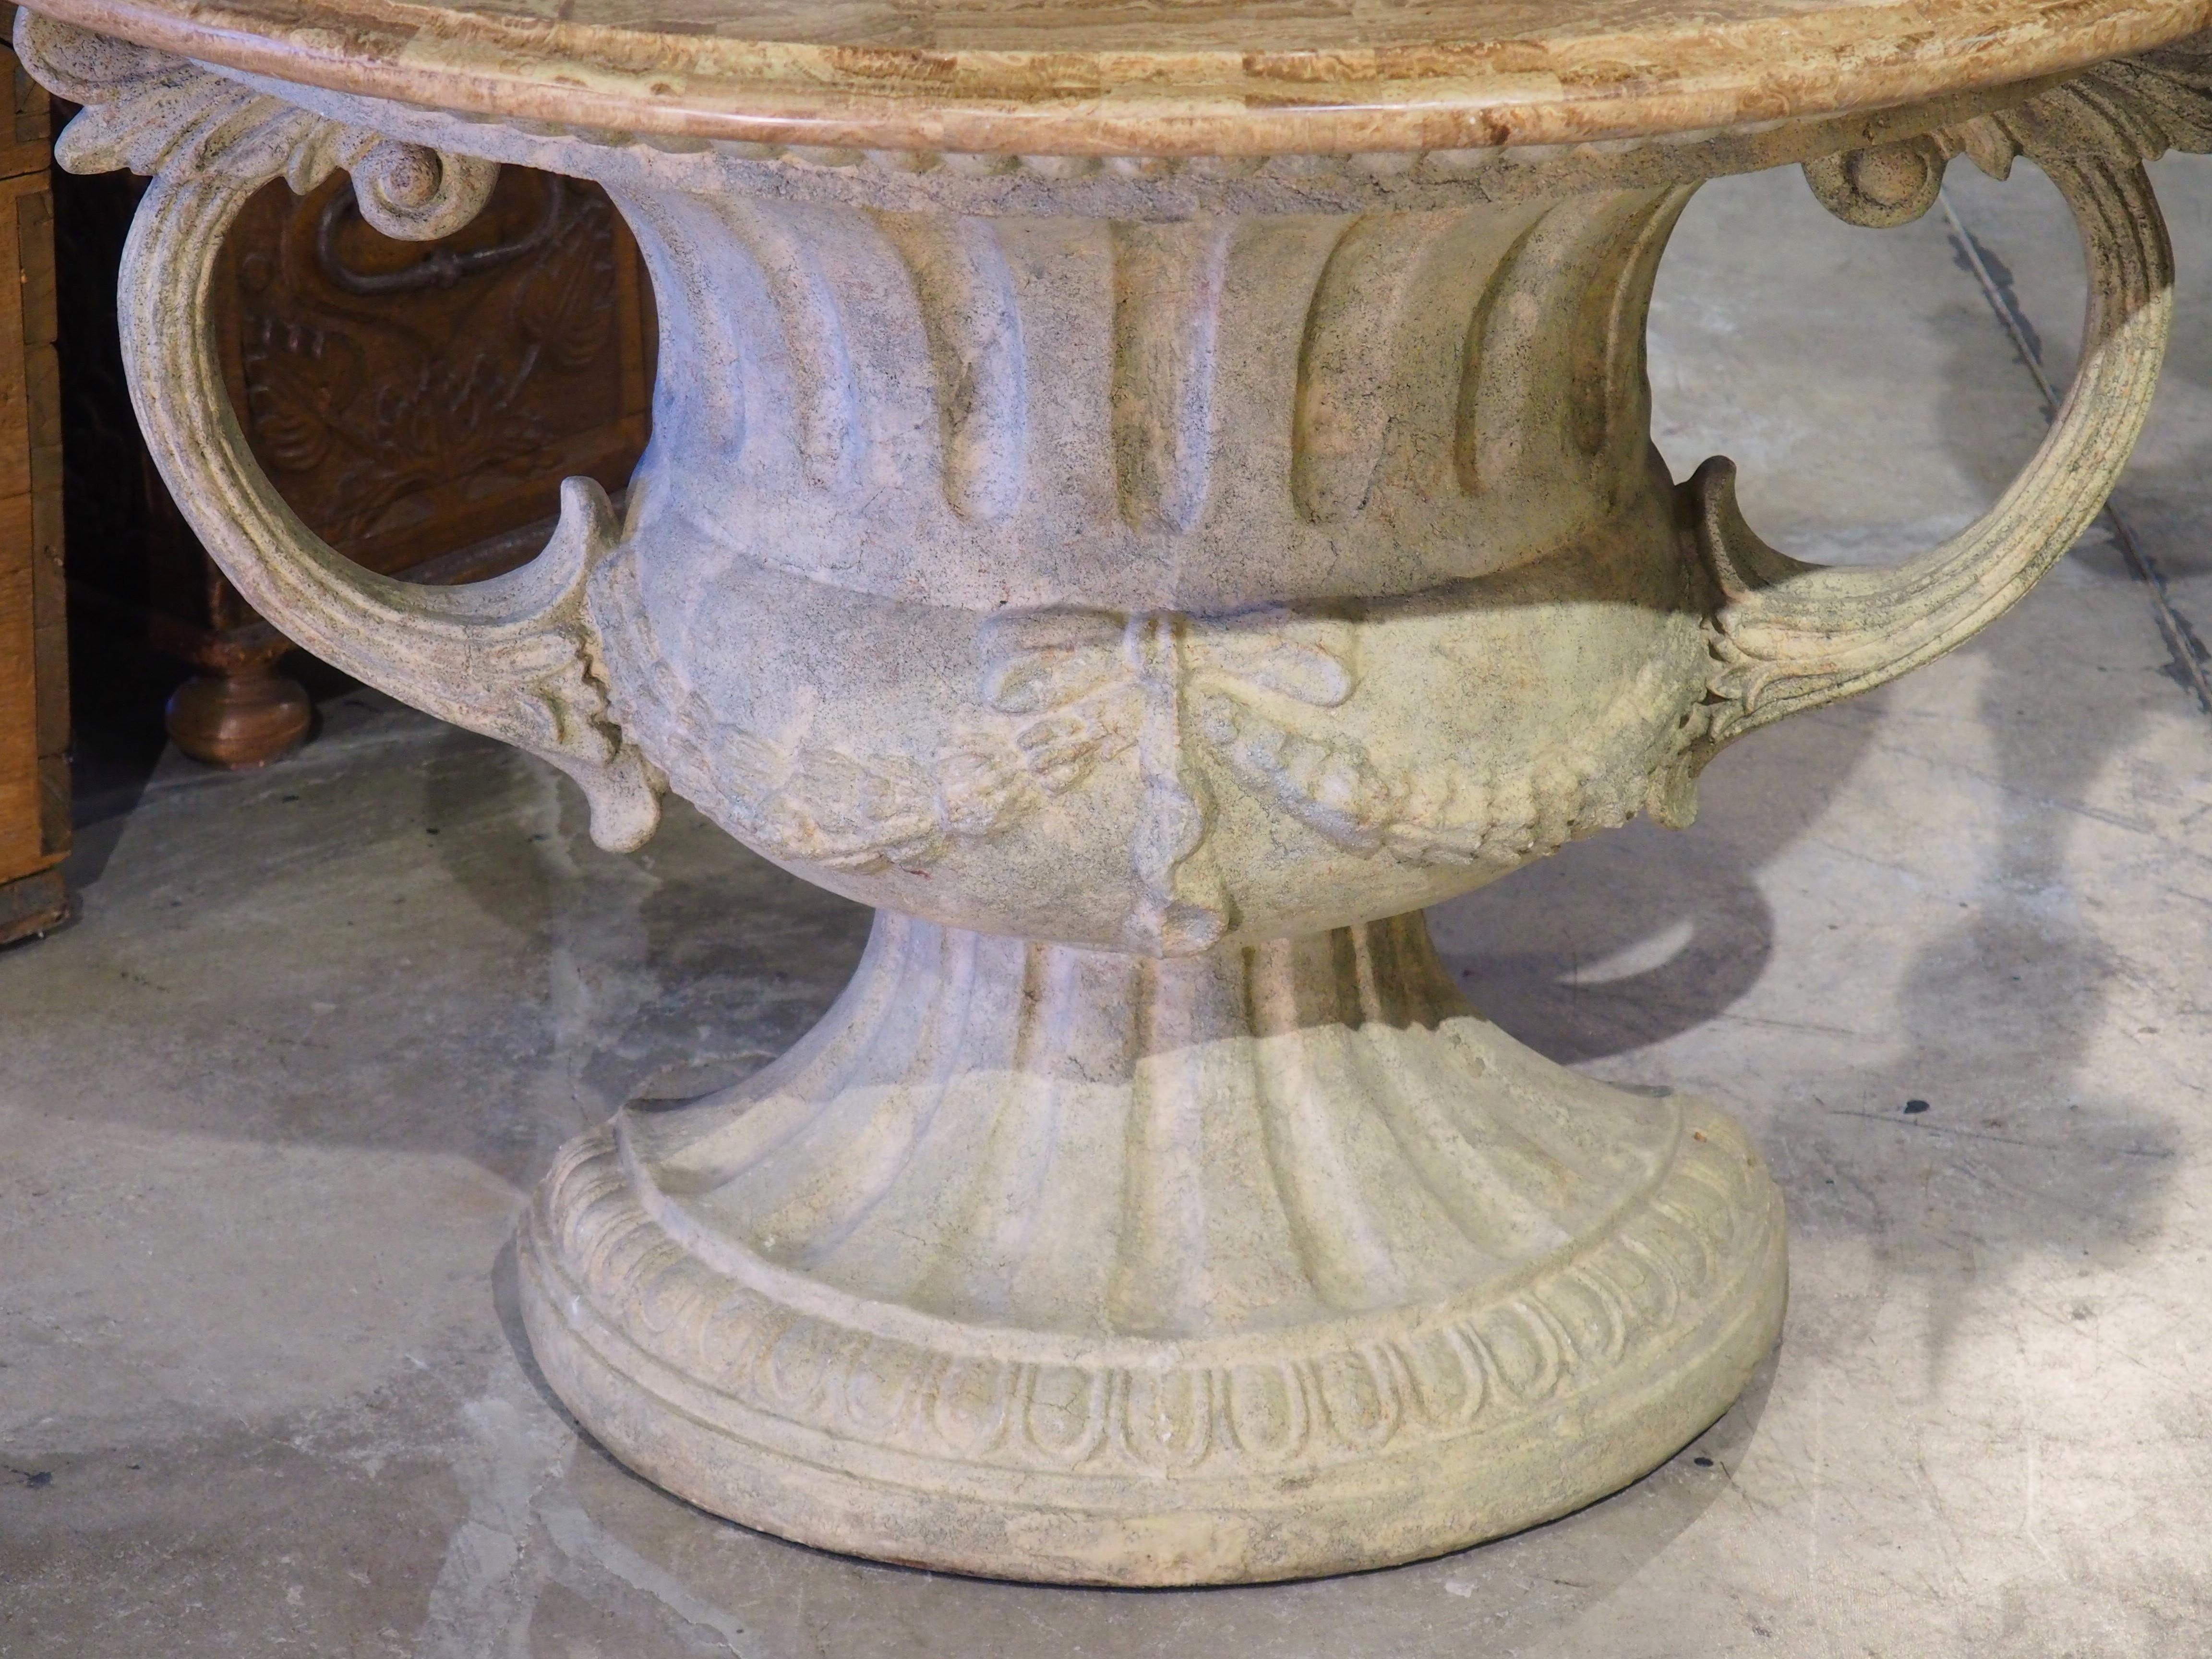 Reminiscent of a campana (bell-shaped) urn, this demi lune console table features a Neoclassical style, molded base. Consisting of a fluted body, the half urn has been painted to mimic antiquity, including hues of gray, green, and cream. A pair of